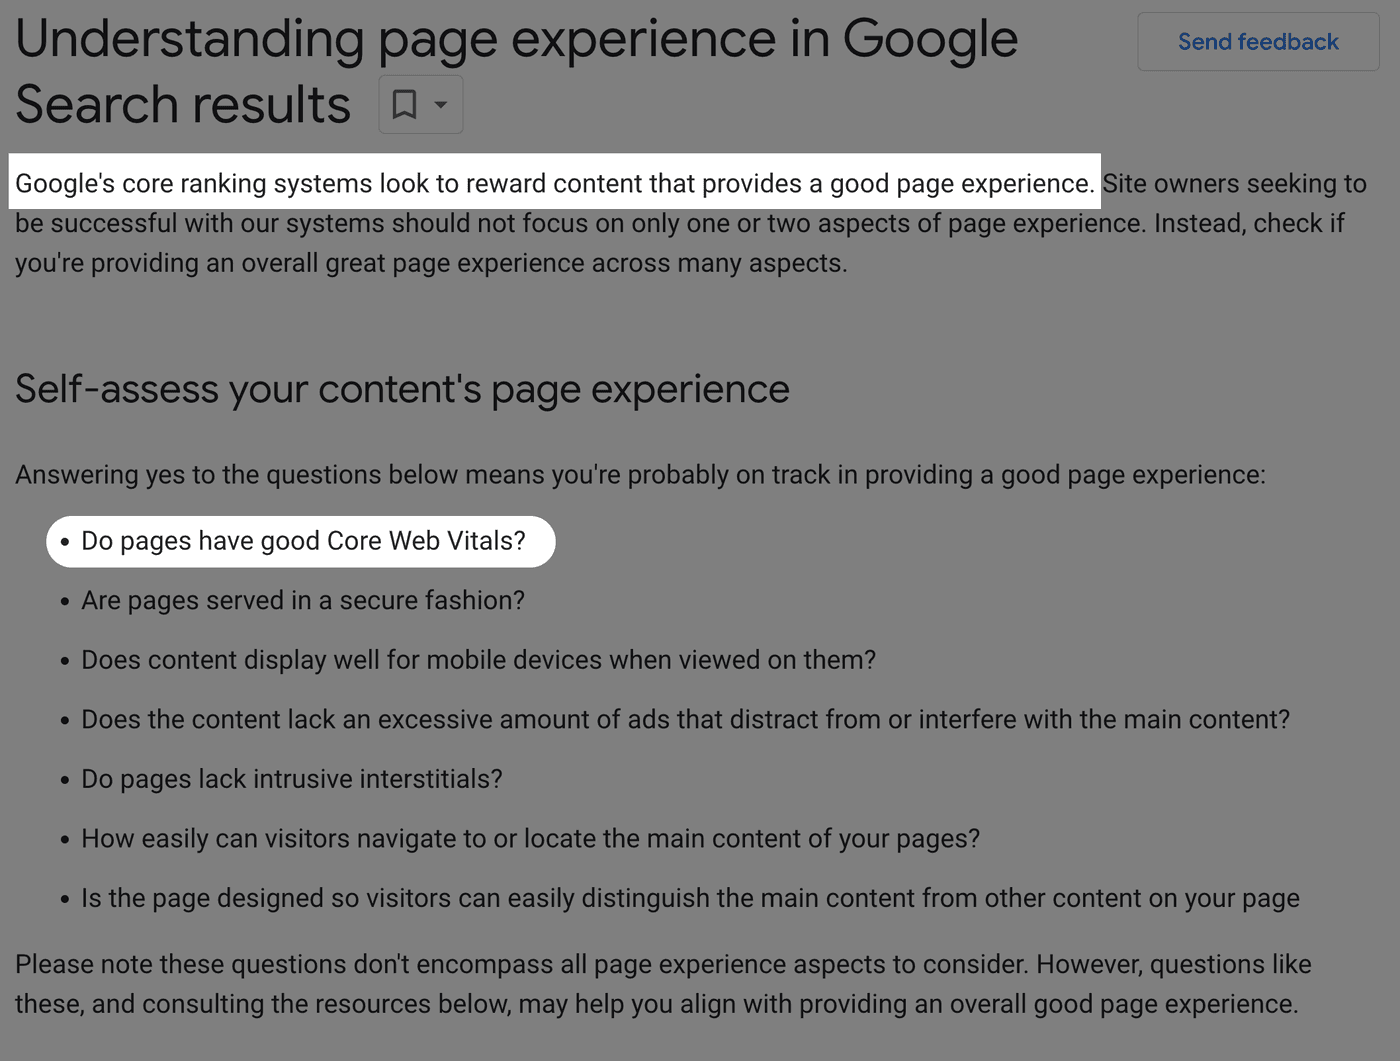 Google Search Central website highlighting that "Google's core ranking systems look to reward content that provides a good page experience" and highlighting a bullet under a "Self-assess your content's page experience" that asks "Do pages have good Core Web Vitals?".